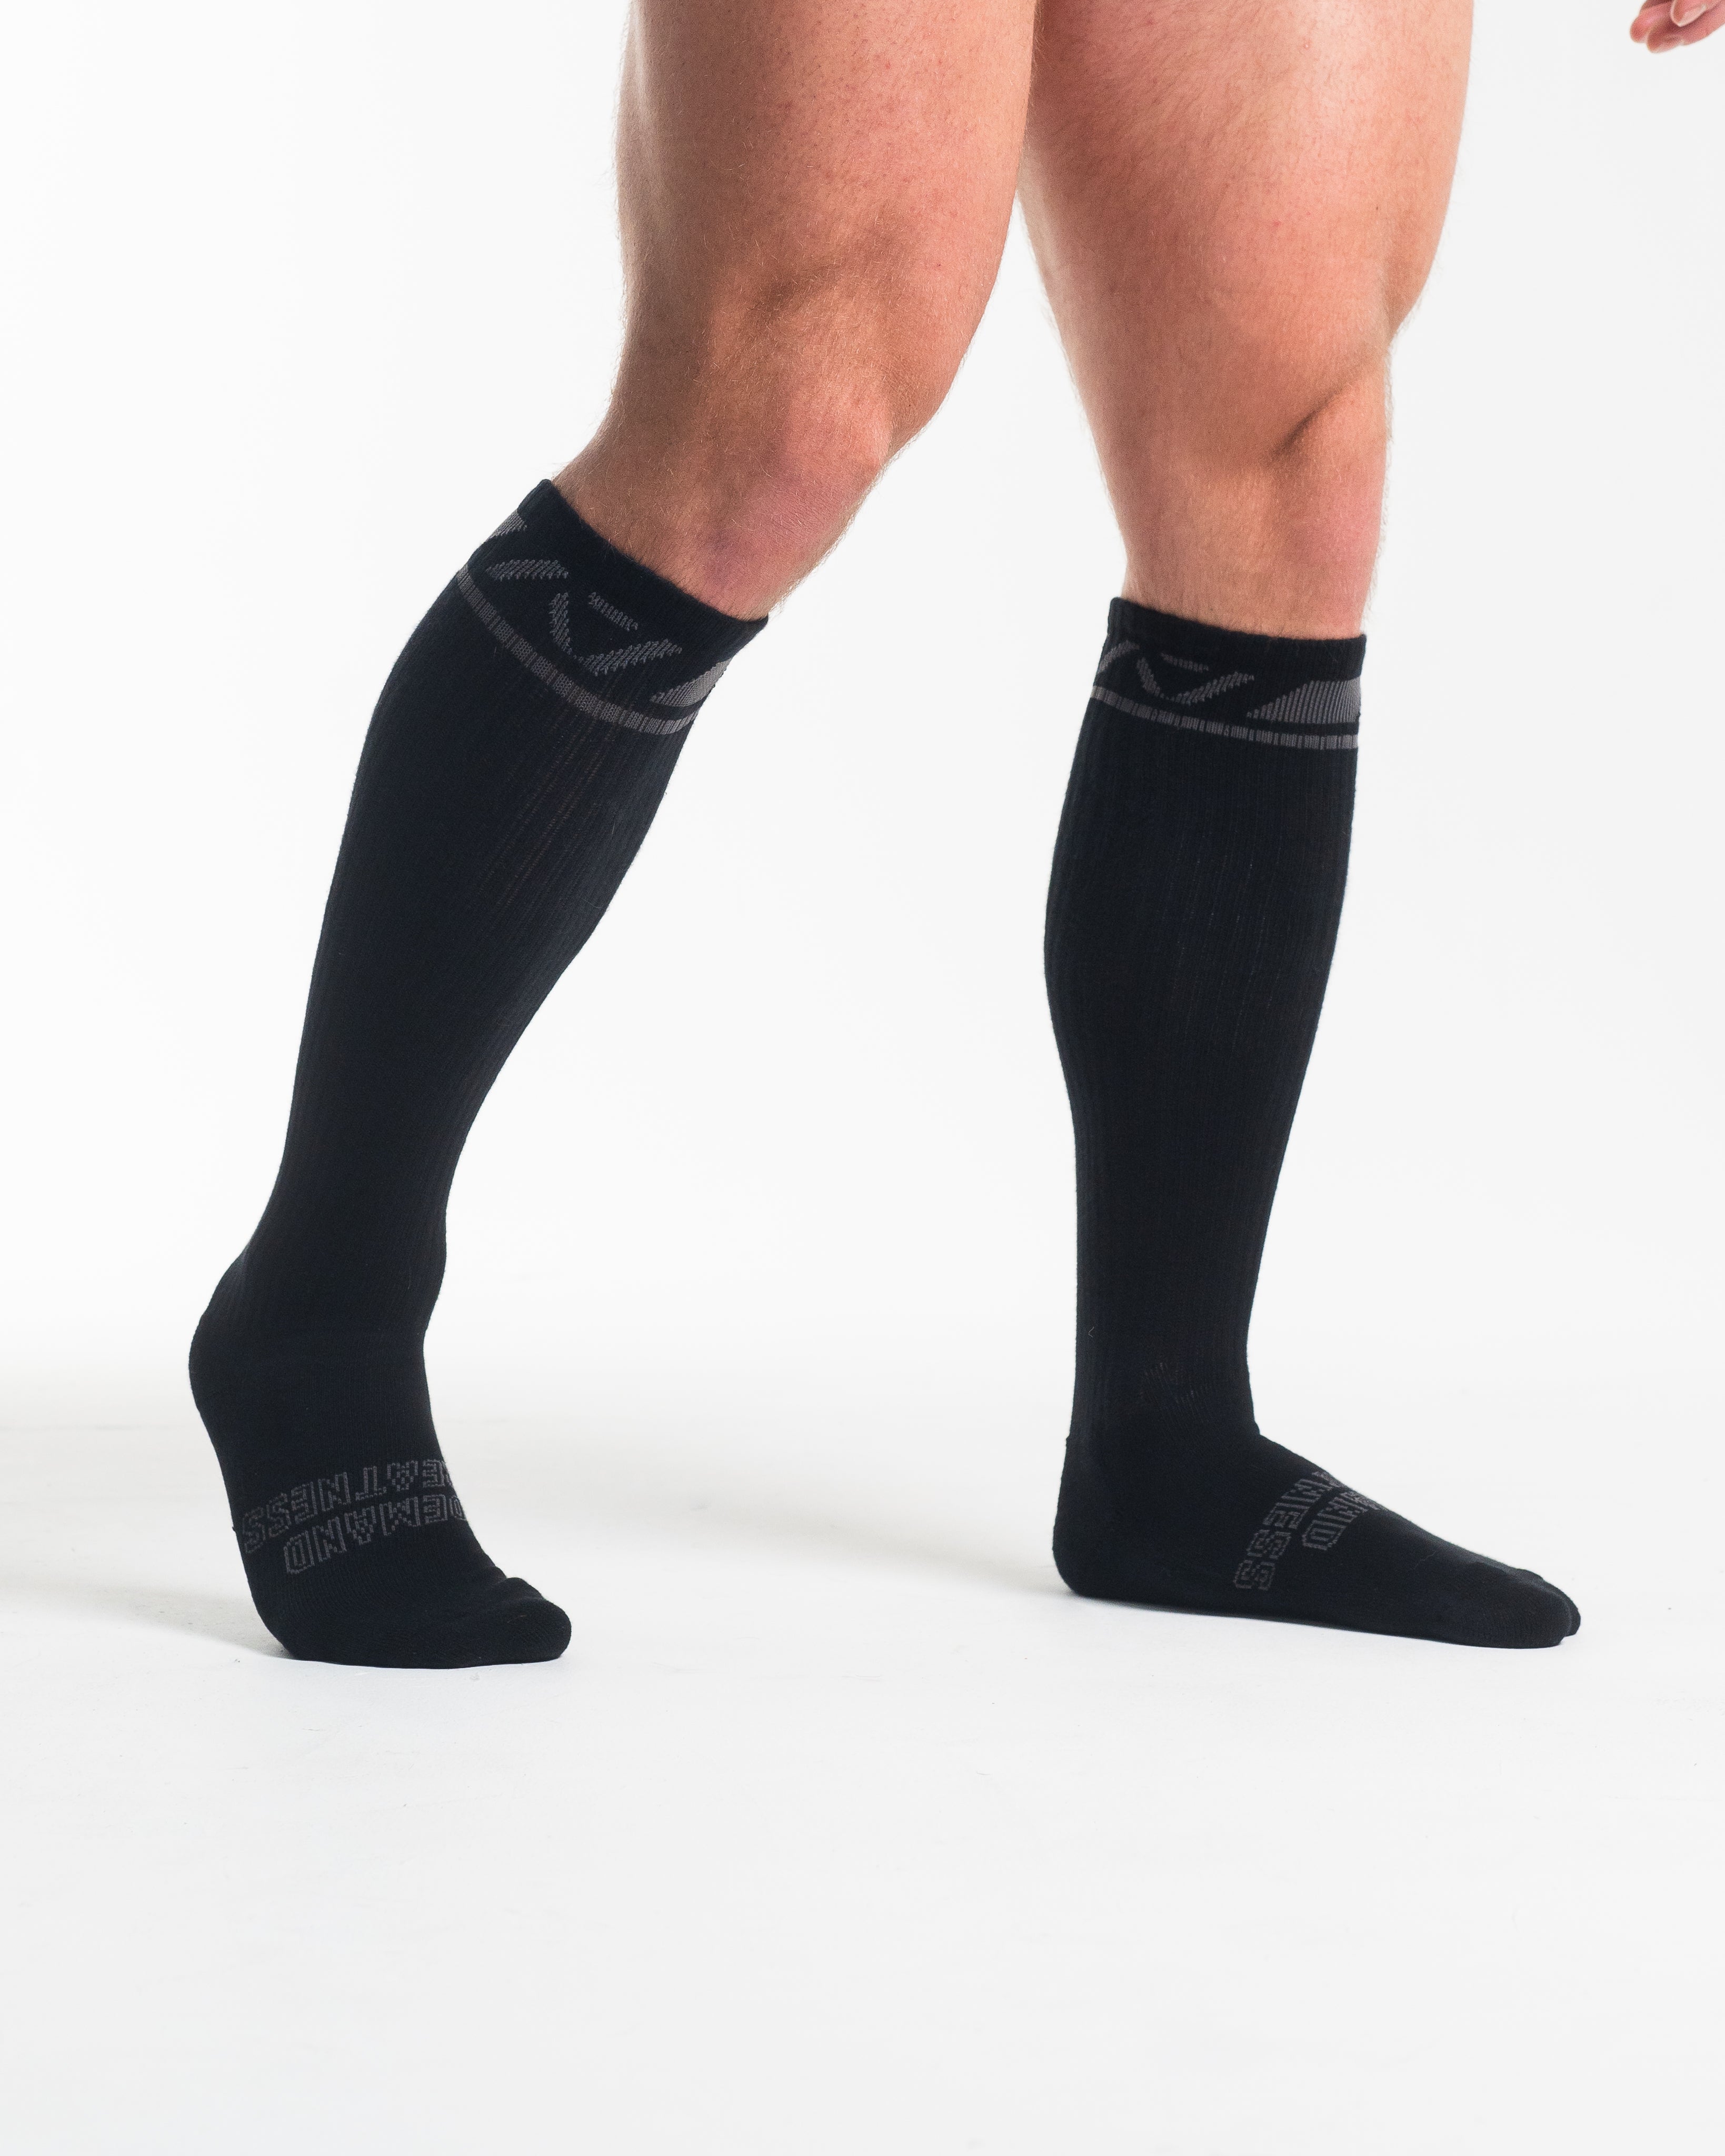 A7 Shadow Stone Deadlift socks are designed specifically for pulls and keep your shins protected from scrapes. A7 deadlift socks are a perfect pair to wear in training or powerlifting competition. The IPF Approved Kit includes Powerlifting Singlet, A7 Meet Shirt, A7 Zebra Wrist Wraps, A7 Deadlift Socks, Hourglass Knee Sleeves (Stiff Knee Sleeves and Rigor Mortis Knee Sleeves). All A7 Powerlifting Equipment shipping to UK, Norway, Switzerland and Iceland.